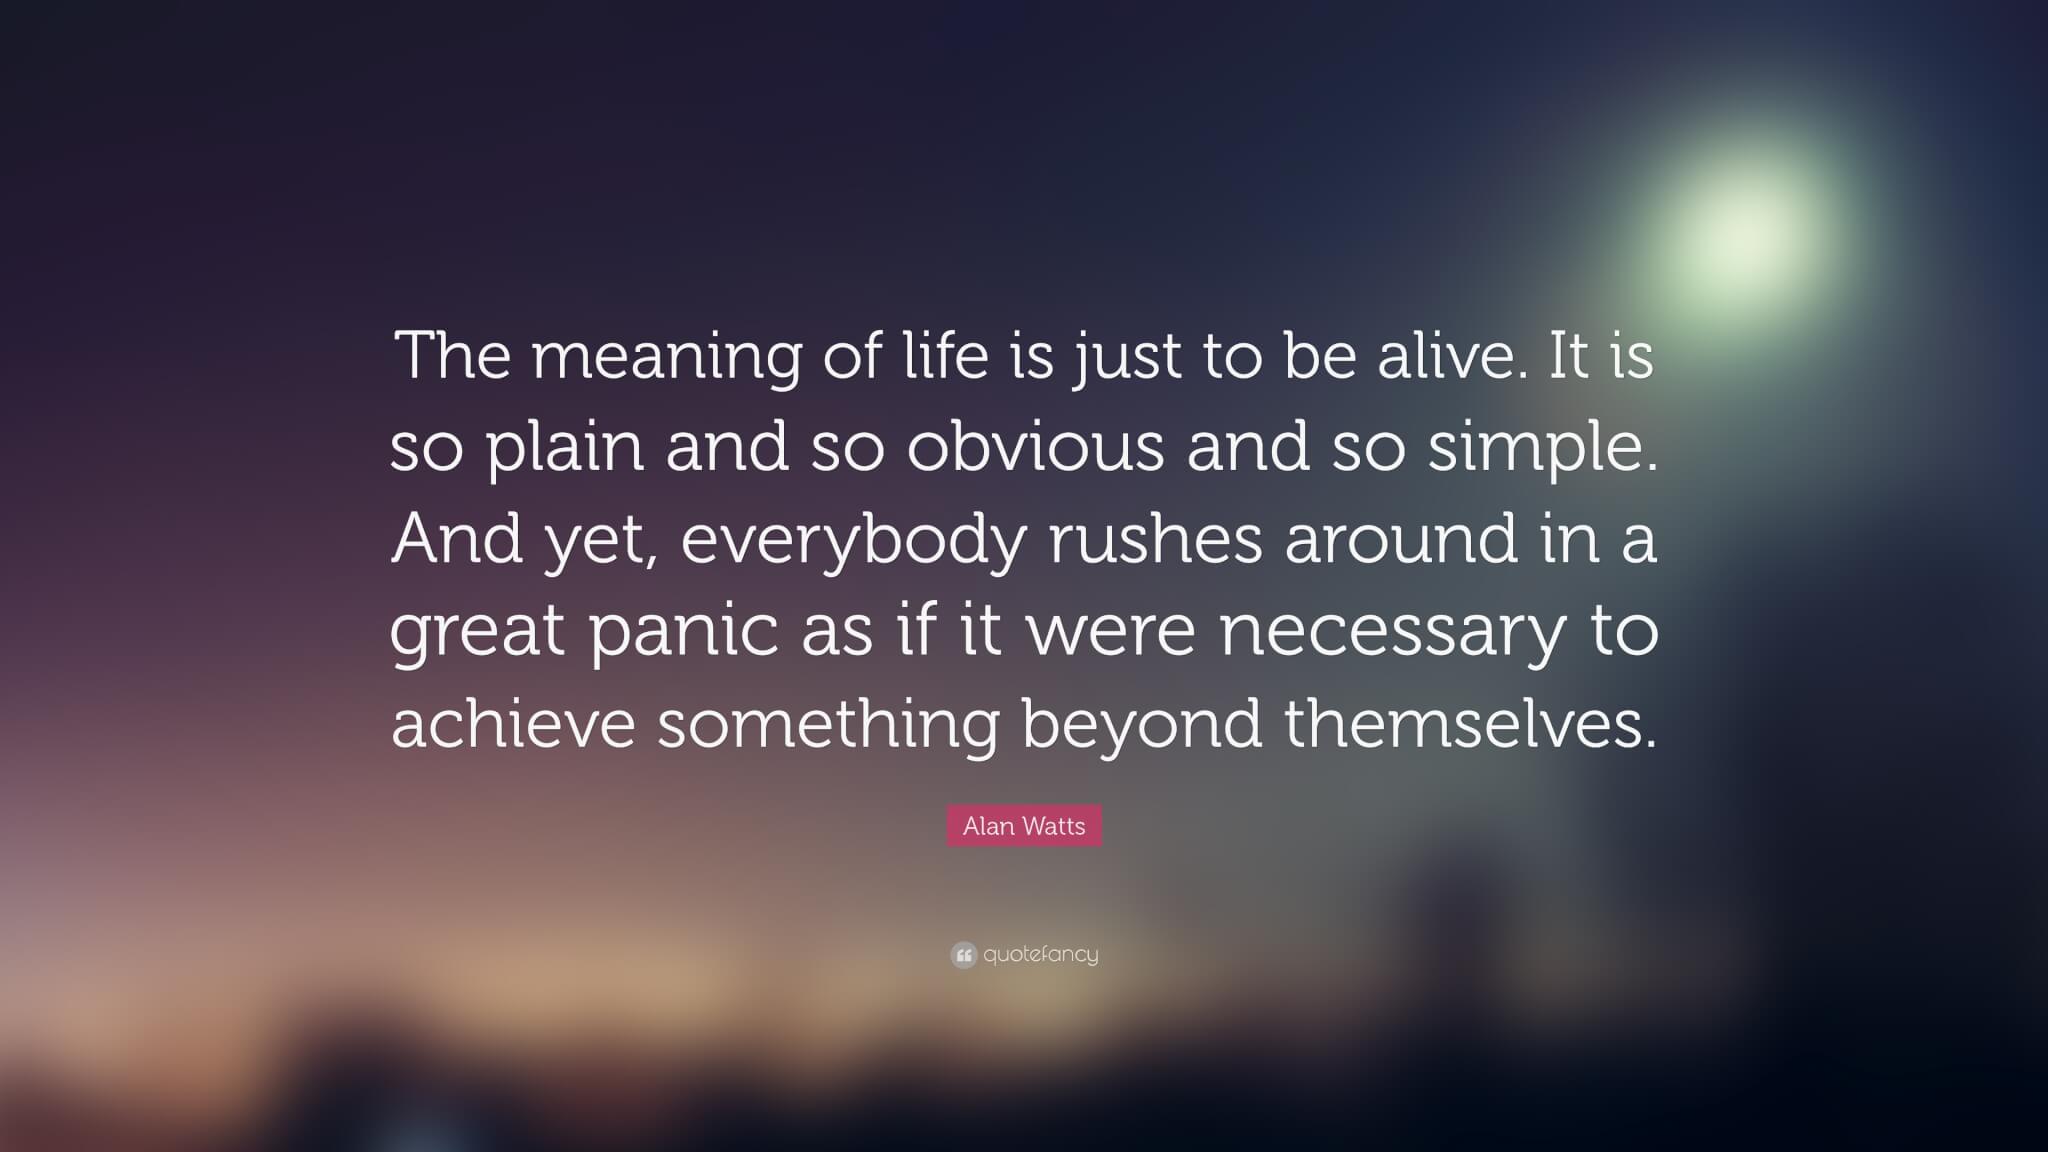 58224-Alan-Watts-Quote-The-meaning-of-life-is-just-to-be-alive-It-is-so